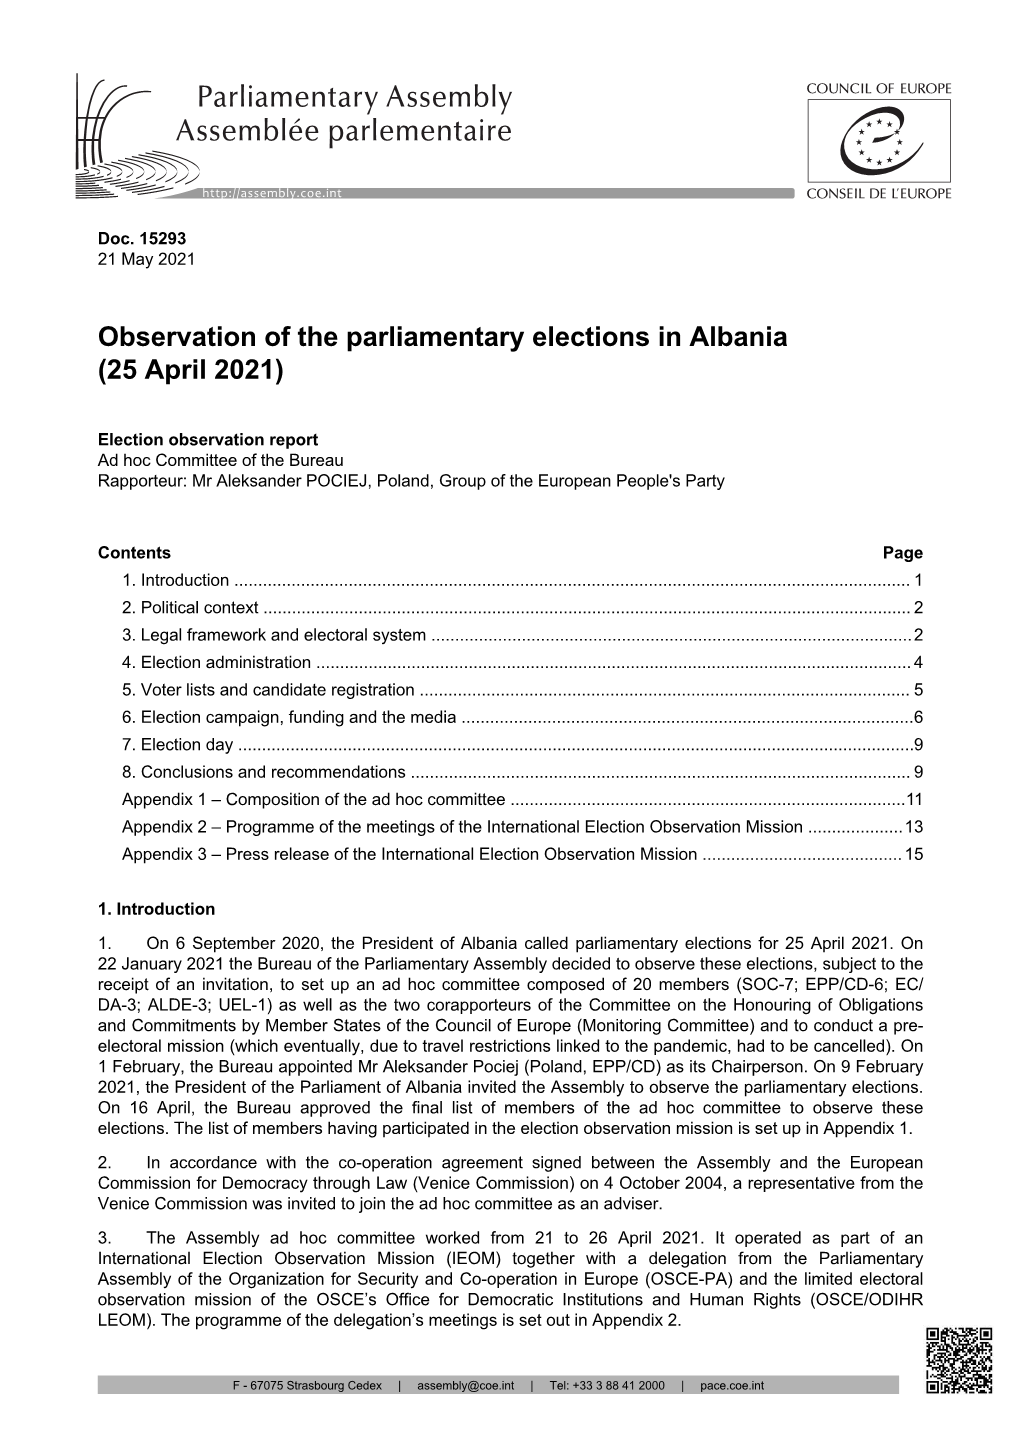 Observation of the Parliamentary Elections in Albania (25 April 2021)